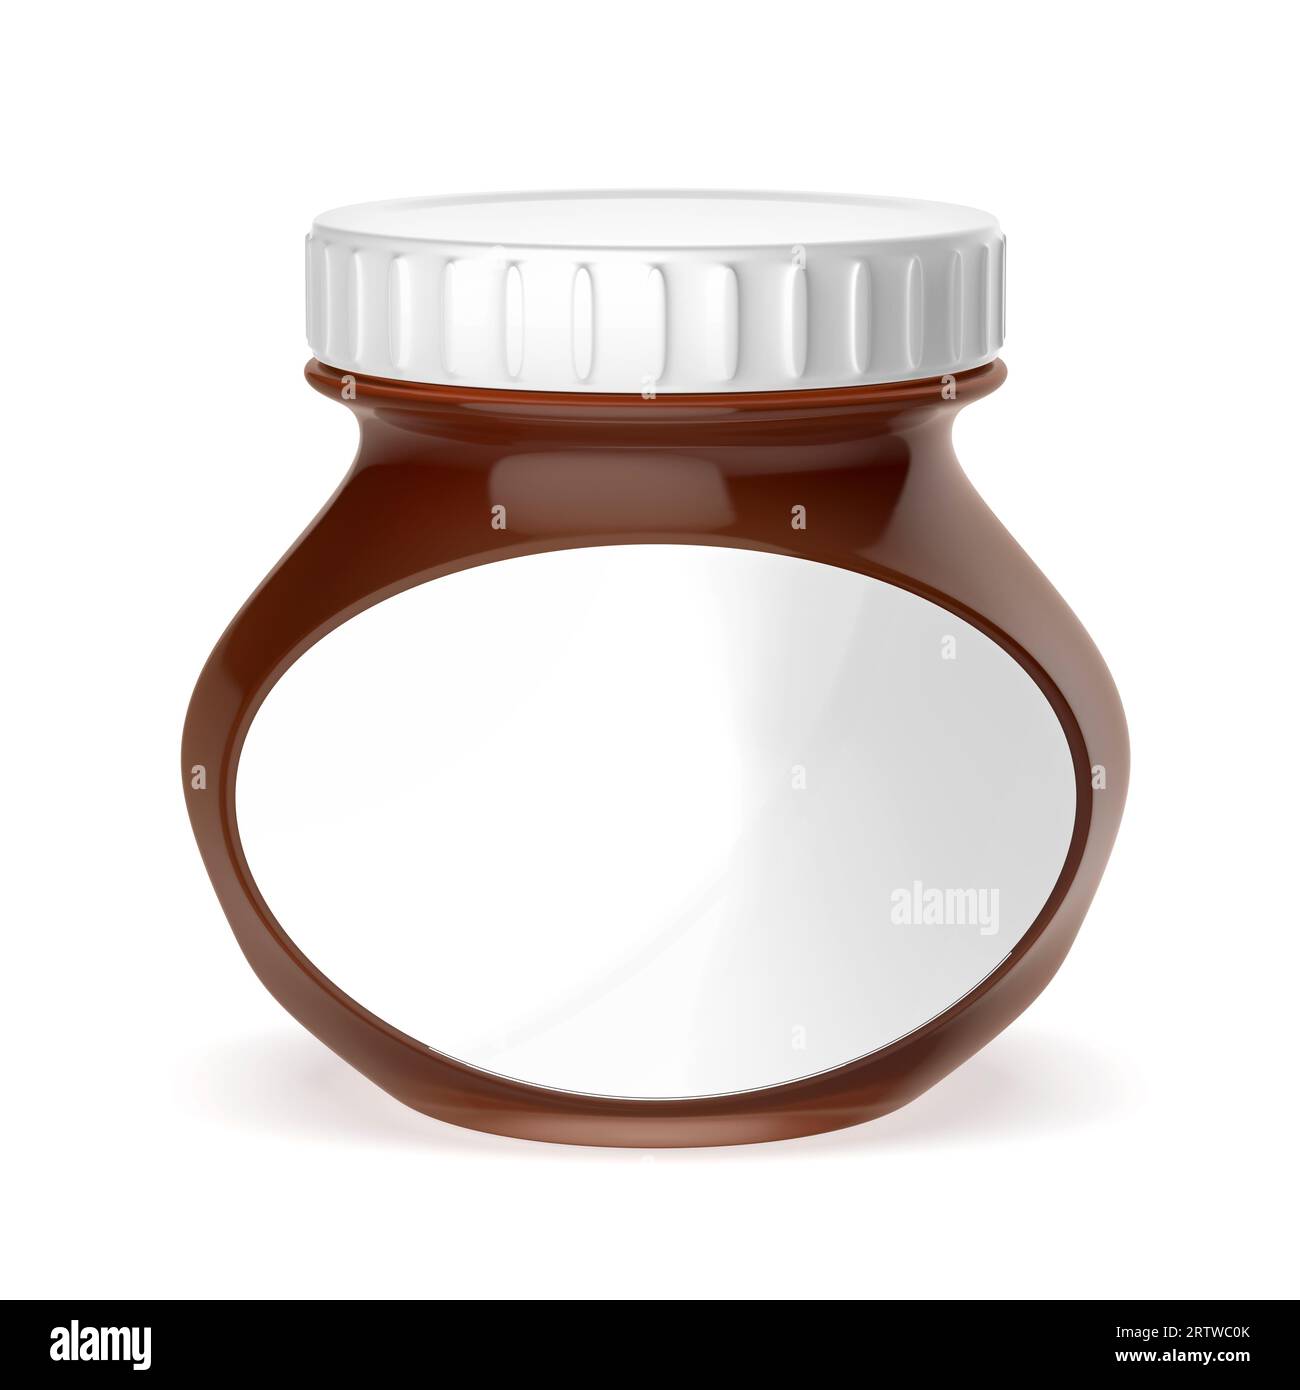 Chocolate spread jar isolated Cut Out Stock Images & Pictures - Alamy